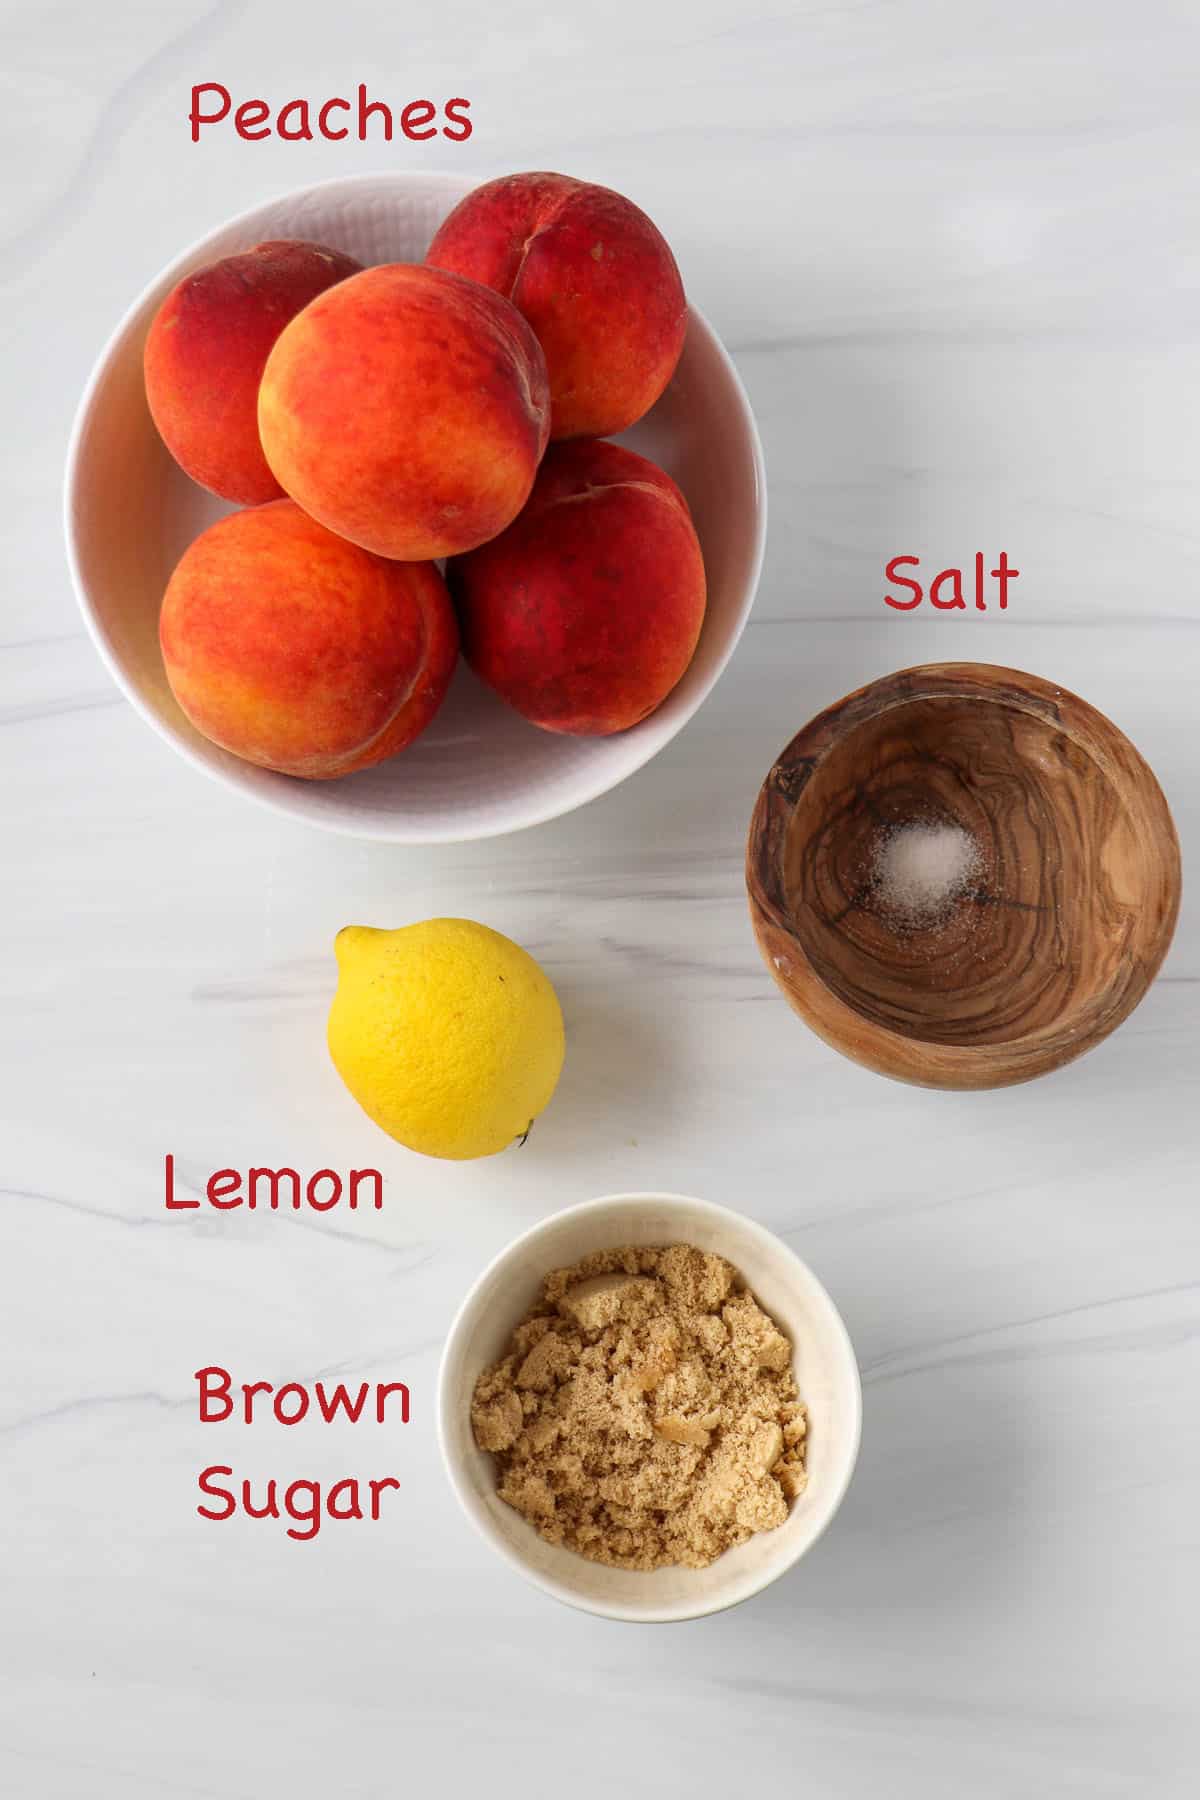 Labeled ingredients for Quick and Easy Peach Compote.